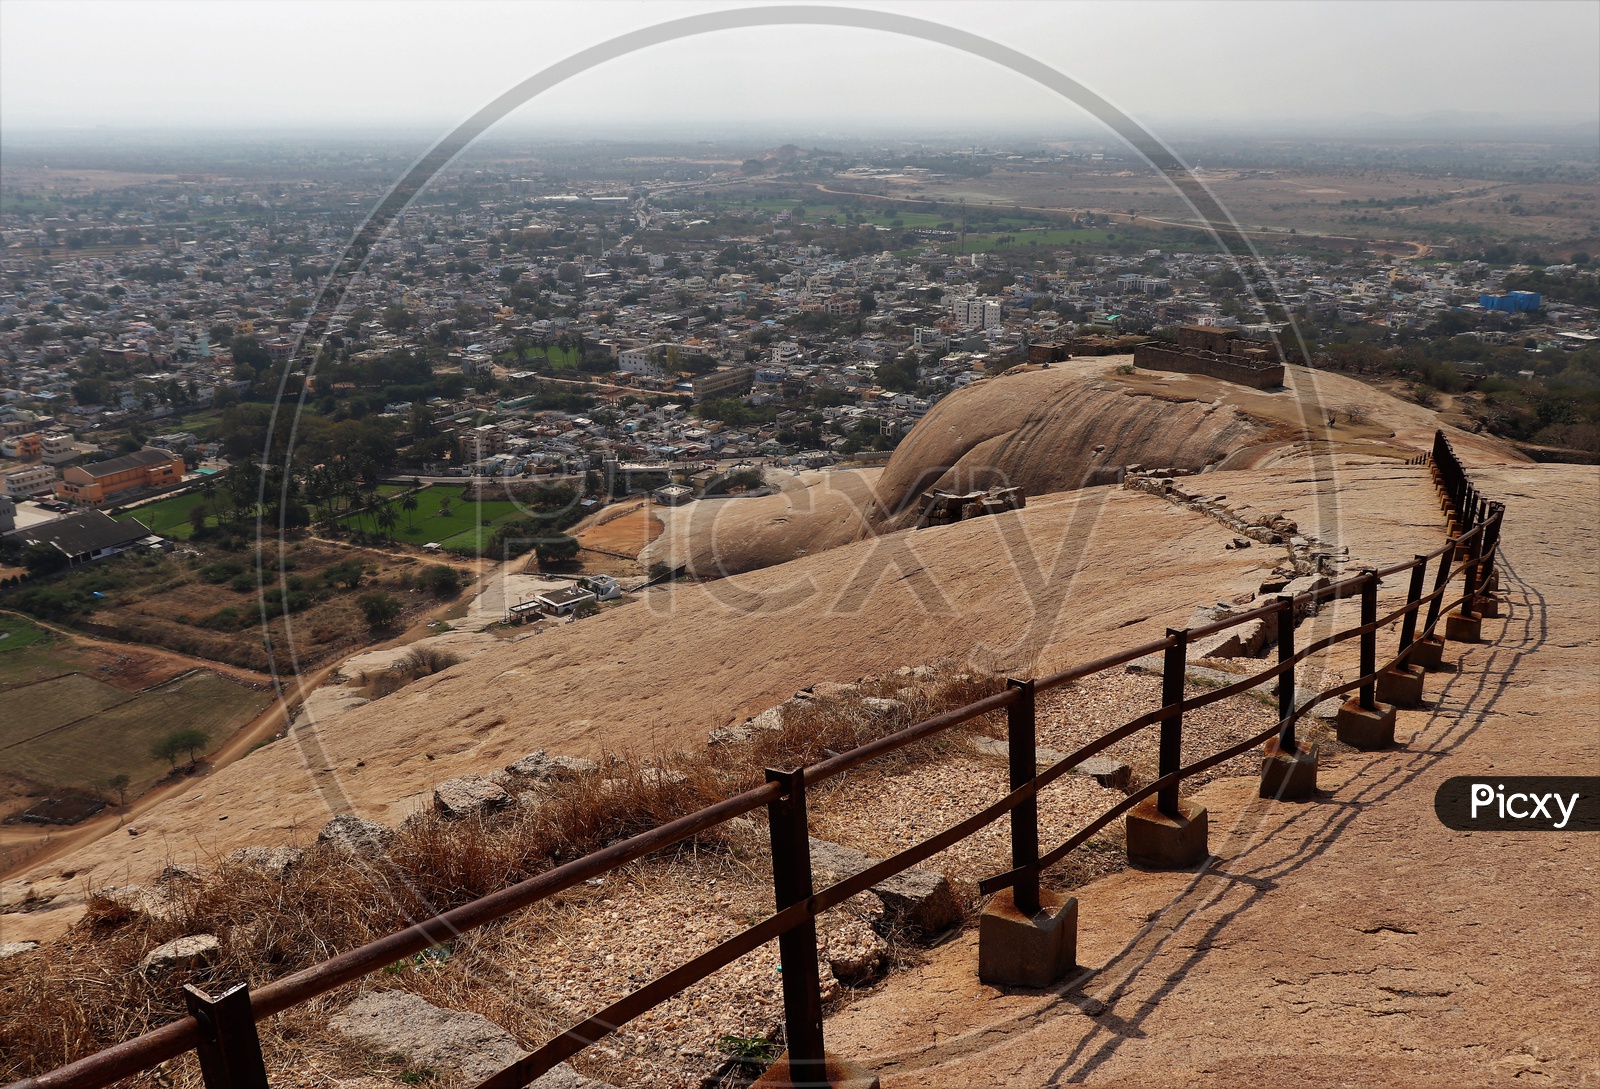 A City Scape View from Bhongir Fort